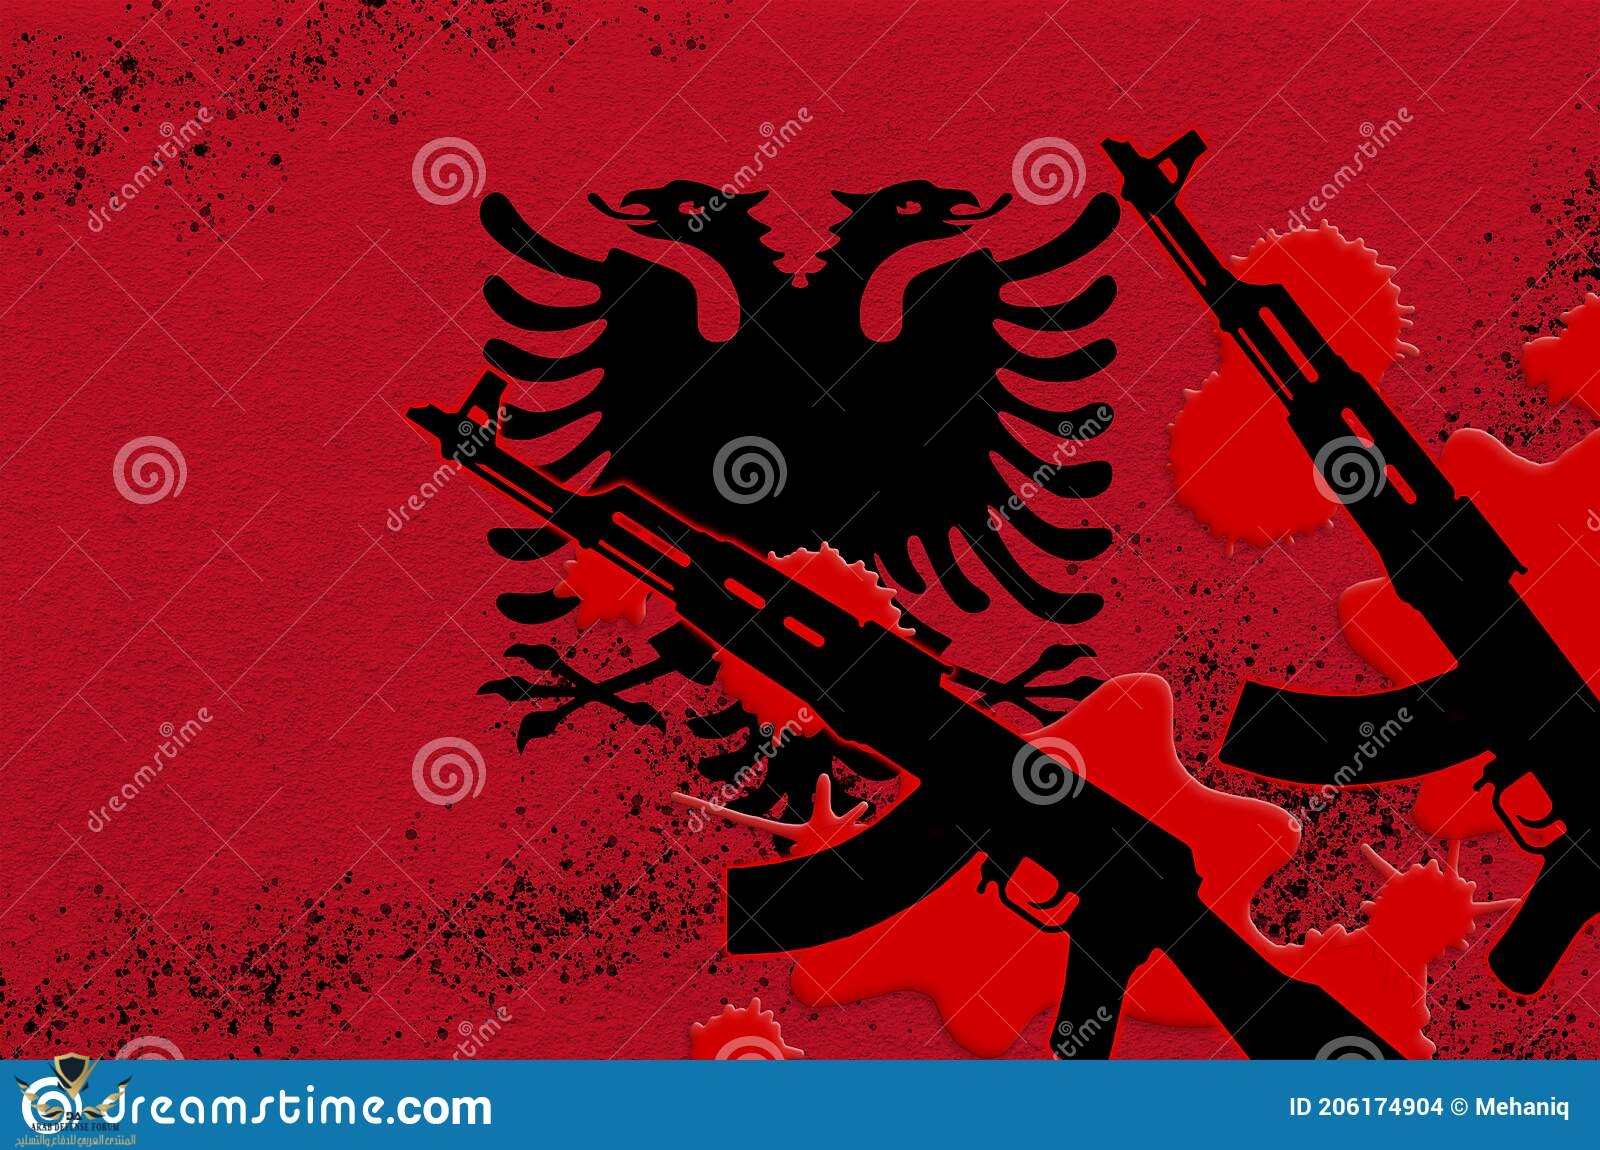 albania-flag-two-black-ak-rifles-red-blood-concept-terror-attack-military-operations-lethal-ou...jpg